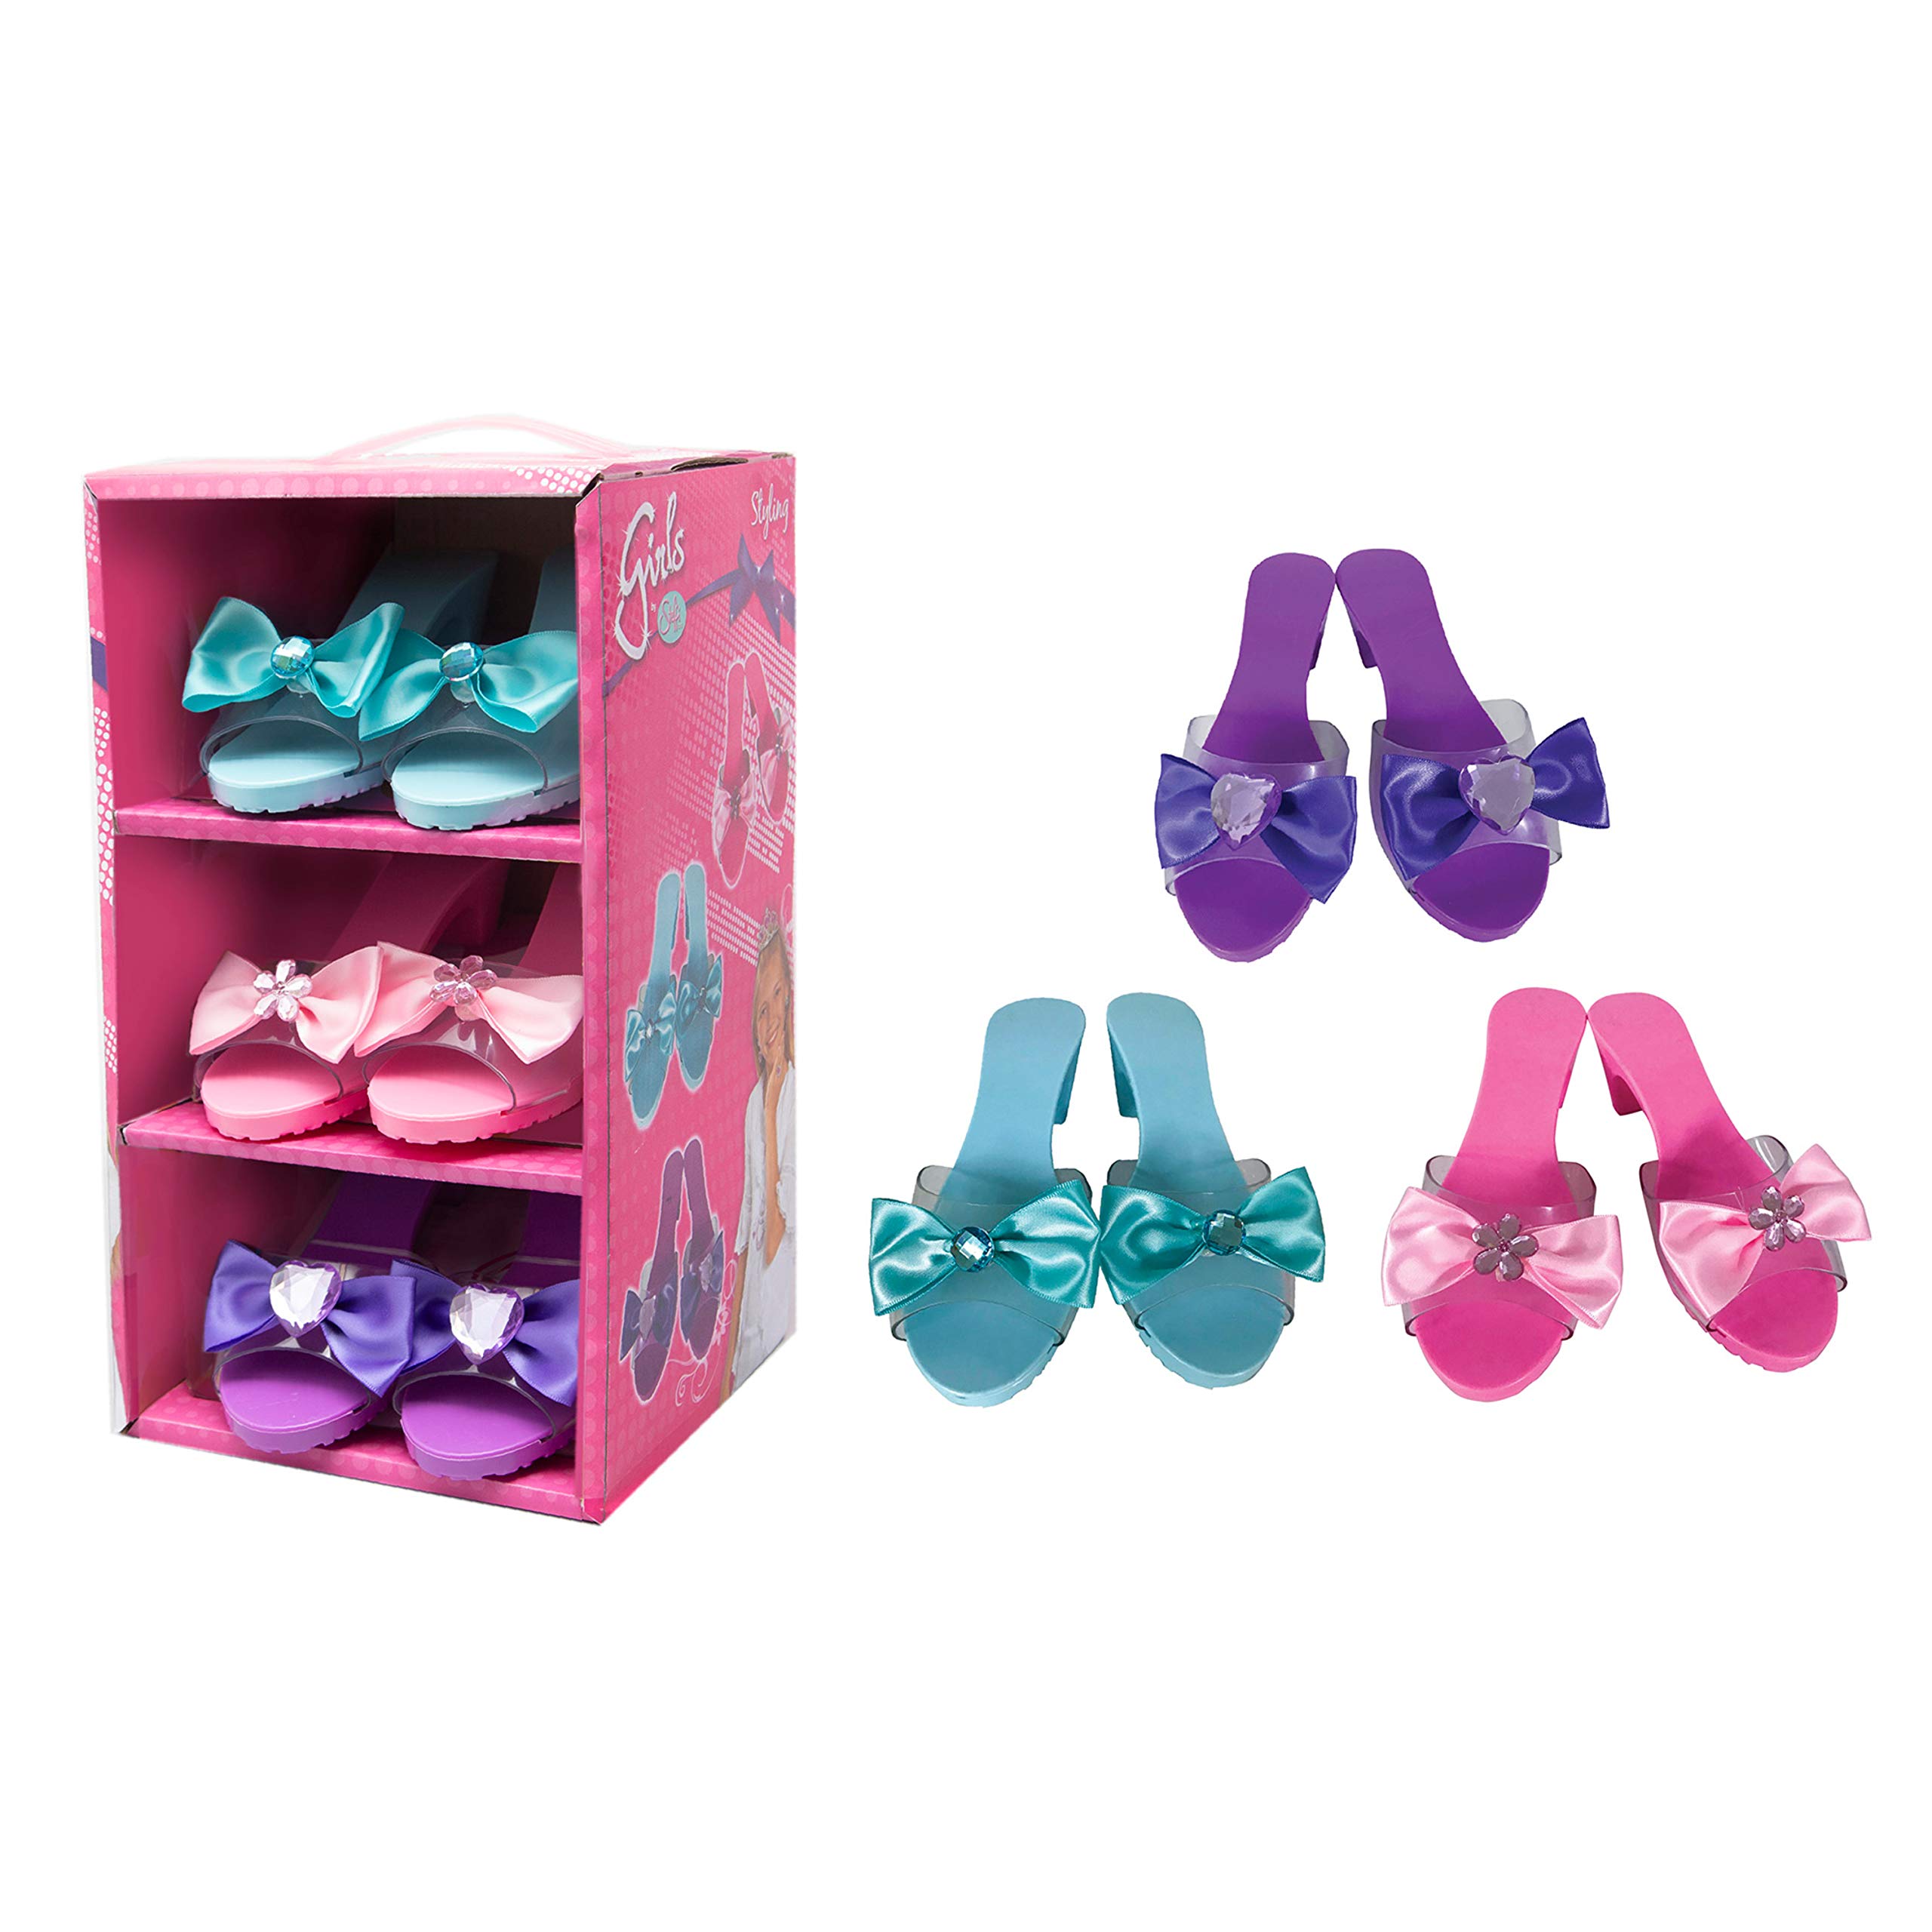 Simba: Princess Shoes Set, 3 Pairs Included, and Styles, Great for Pretend Play or Costume Accessories, For Ages 3 and up